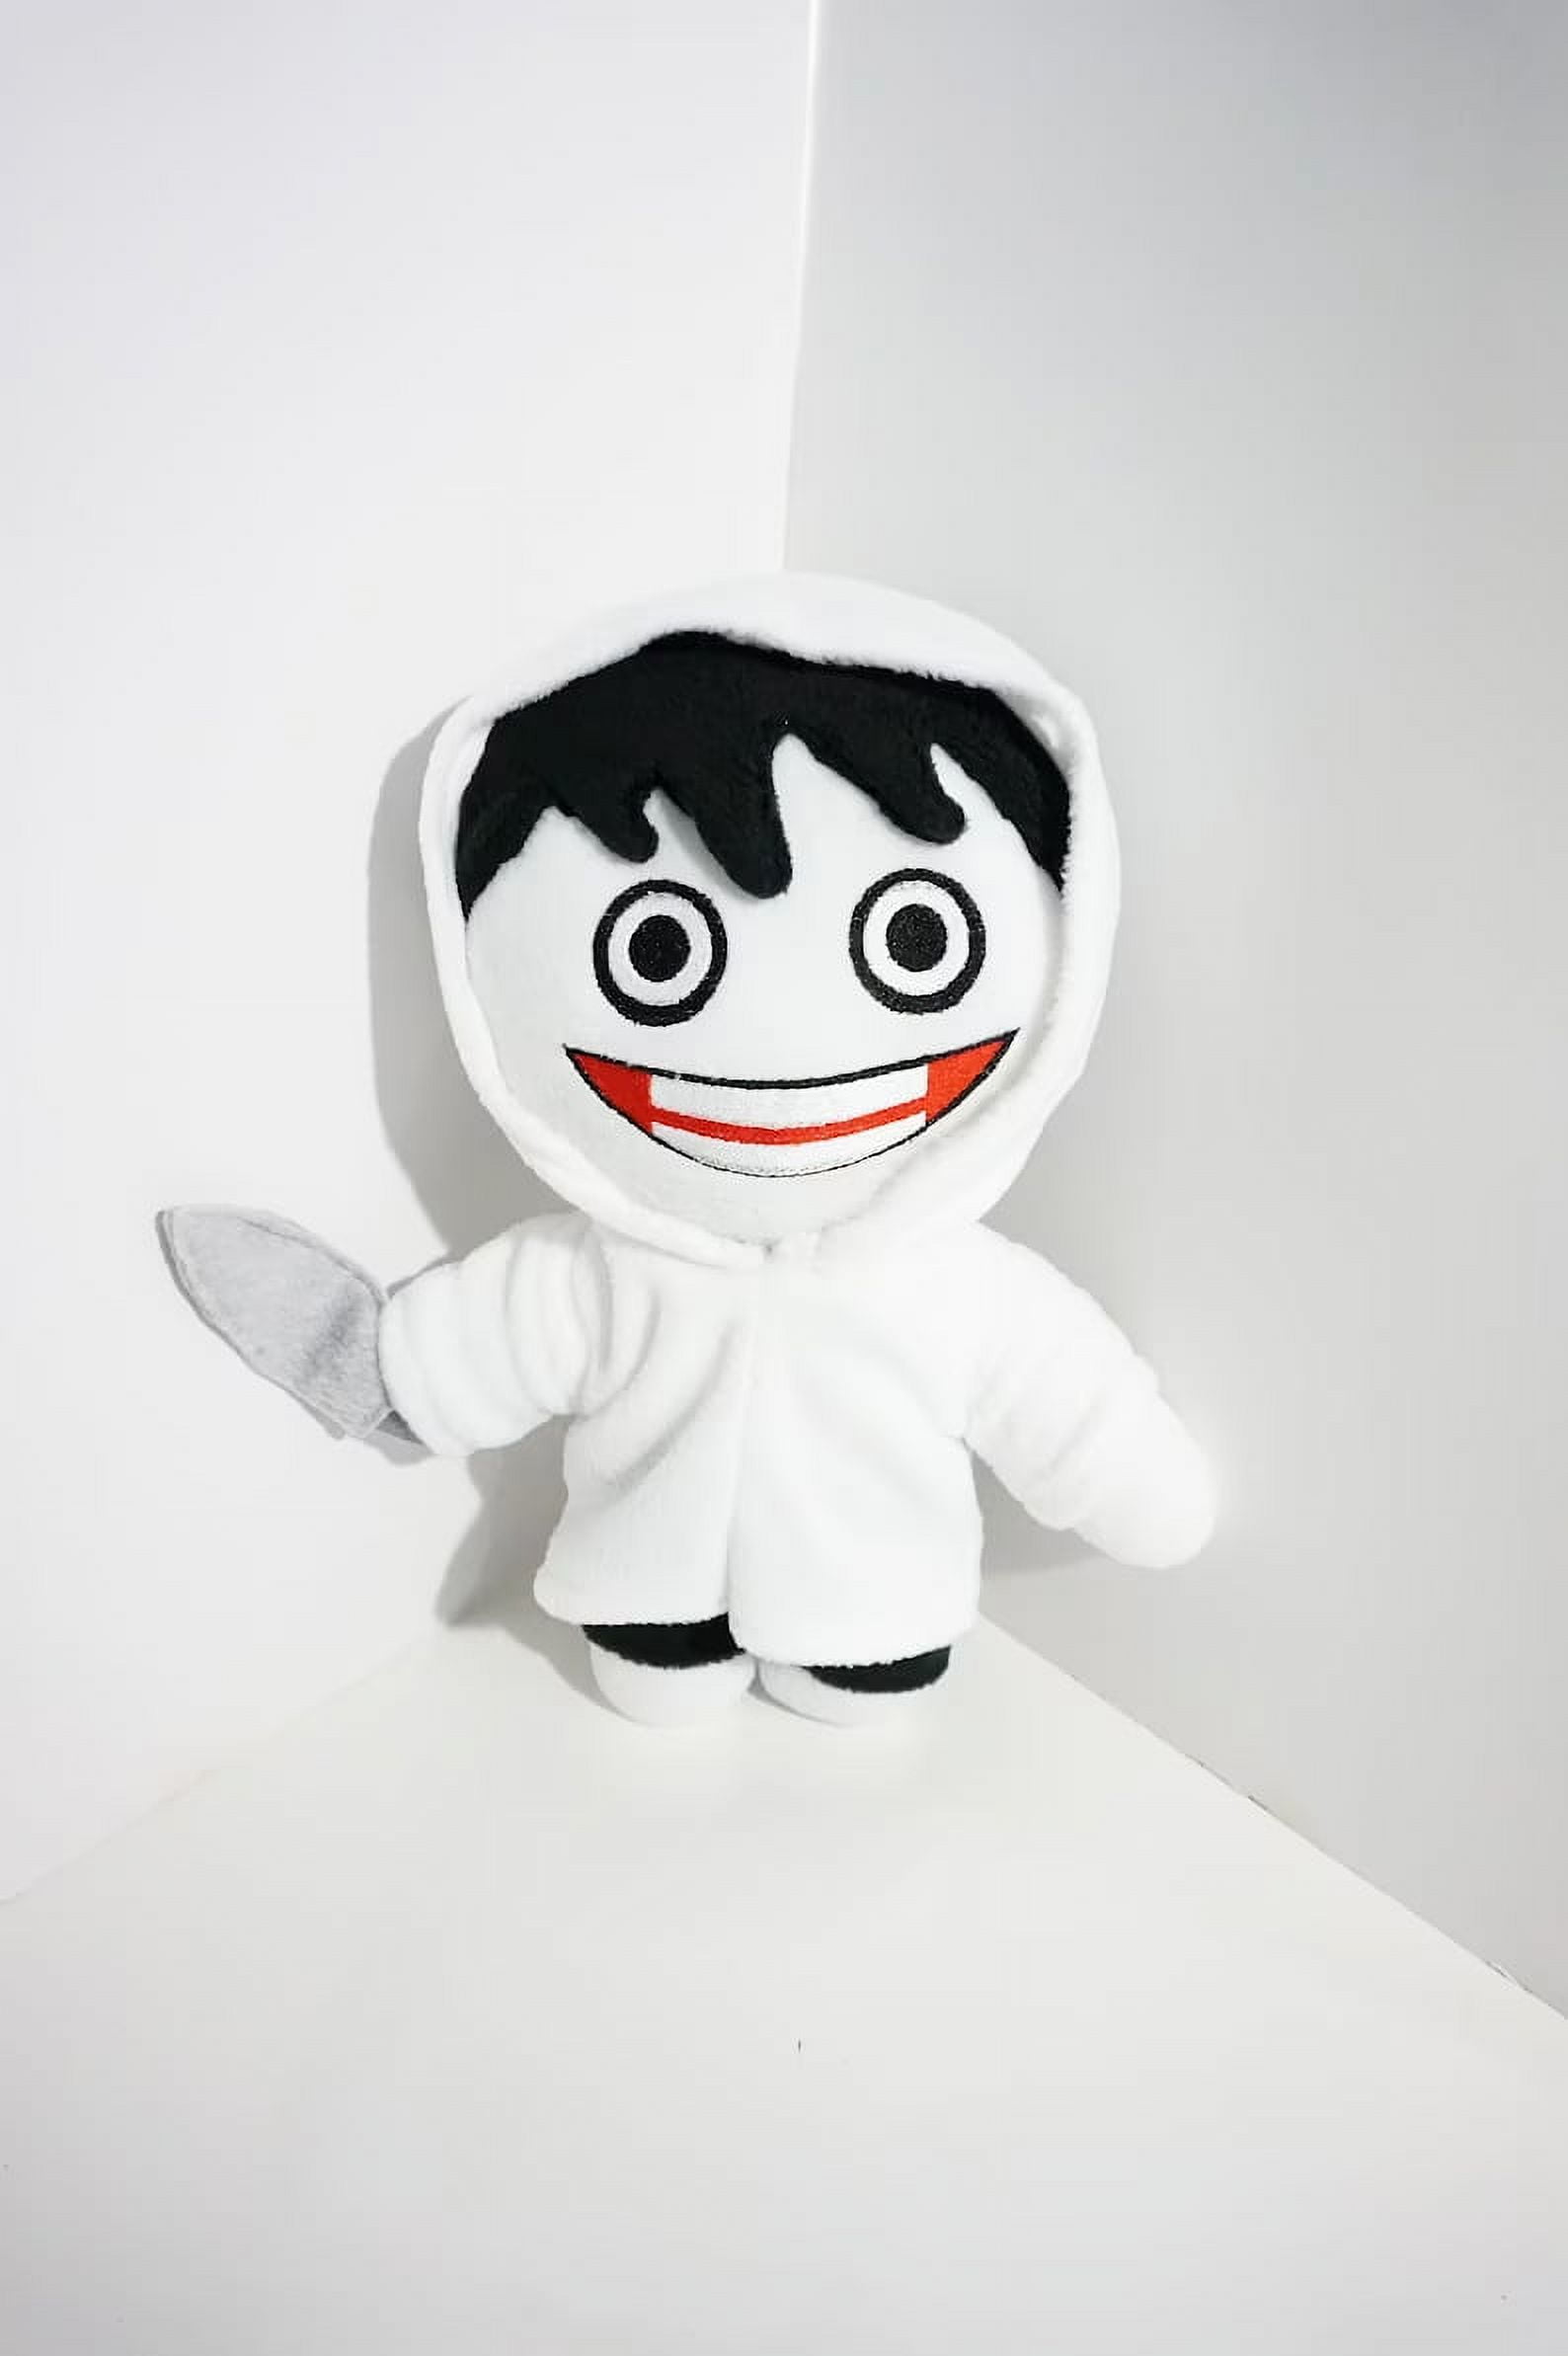 Doors Plush - 8 Ambush Plushies Toy for Fans Gift, 2022 New Monster Horror  Game Stuffed Figure Doll for Kids and Adults, Halloween Christmas Birthday